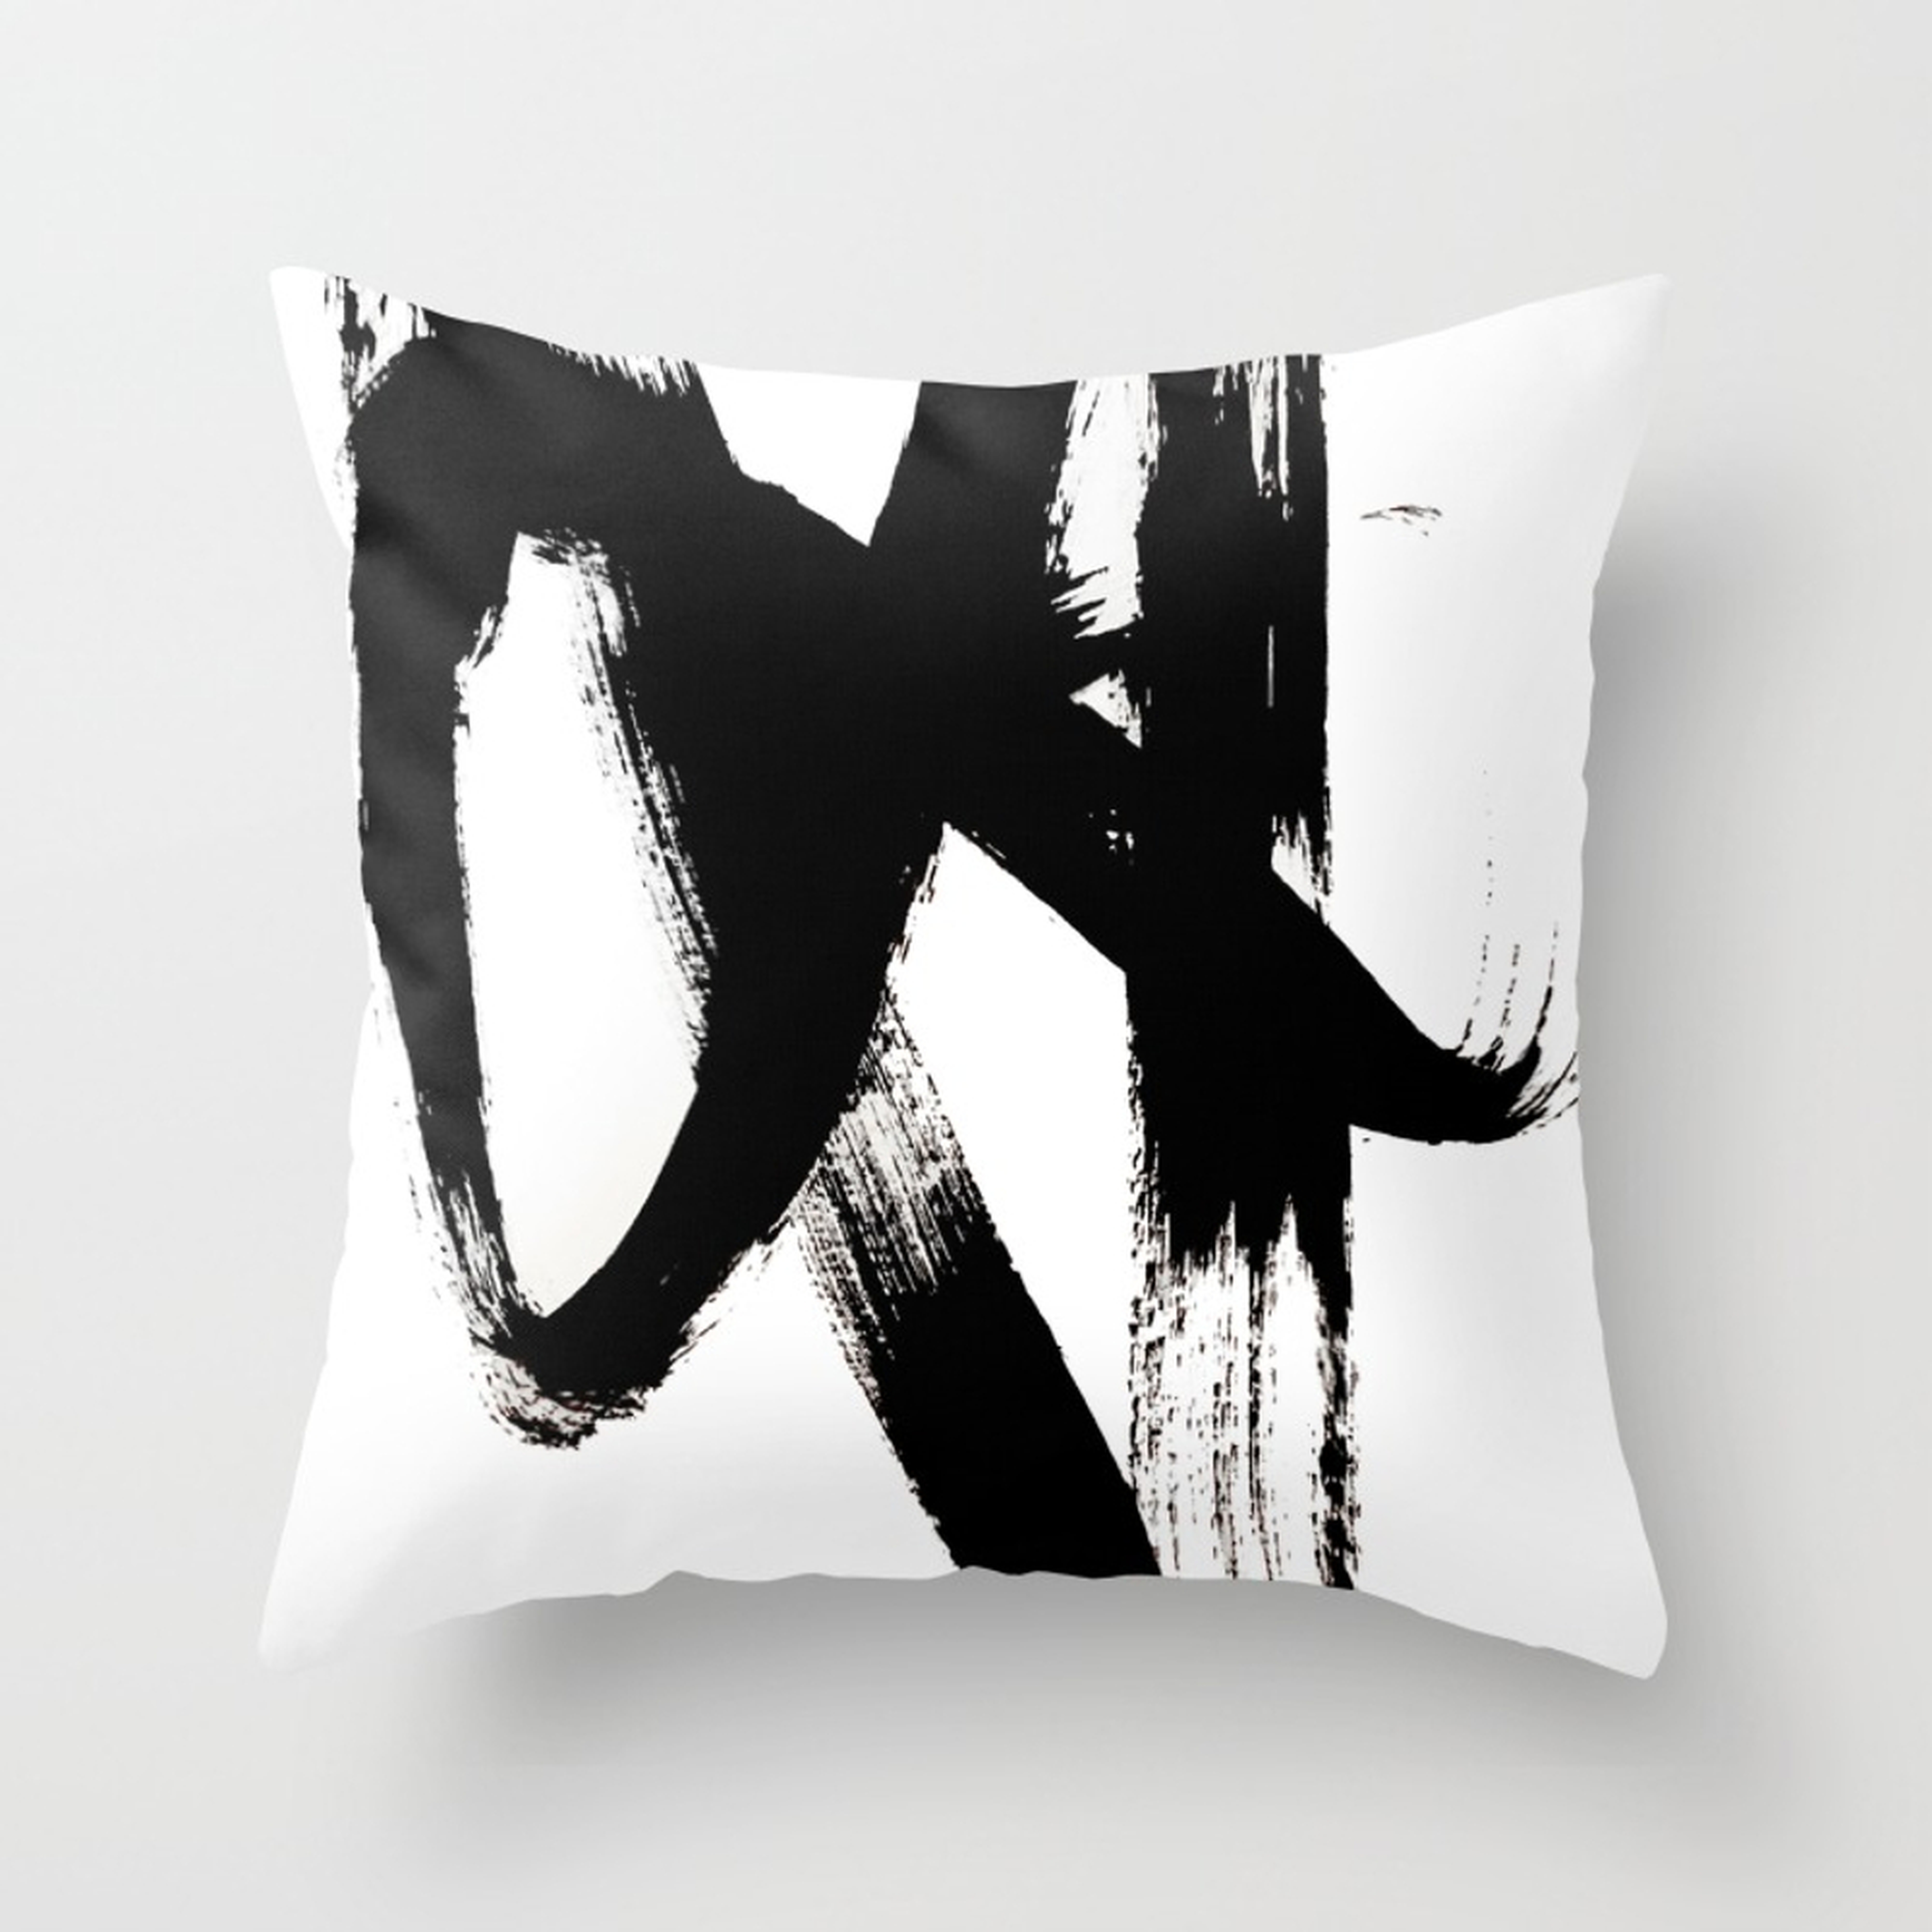 Brushstroke 2 - simple black and white Throw Pillow - Outdoor Cover (20" x 20") with pillow insert by Blushingbrushstudio - Society6